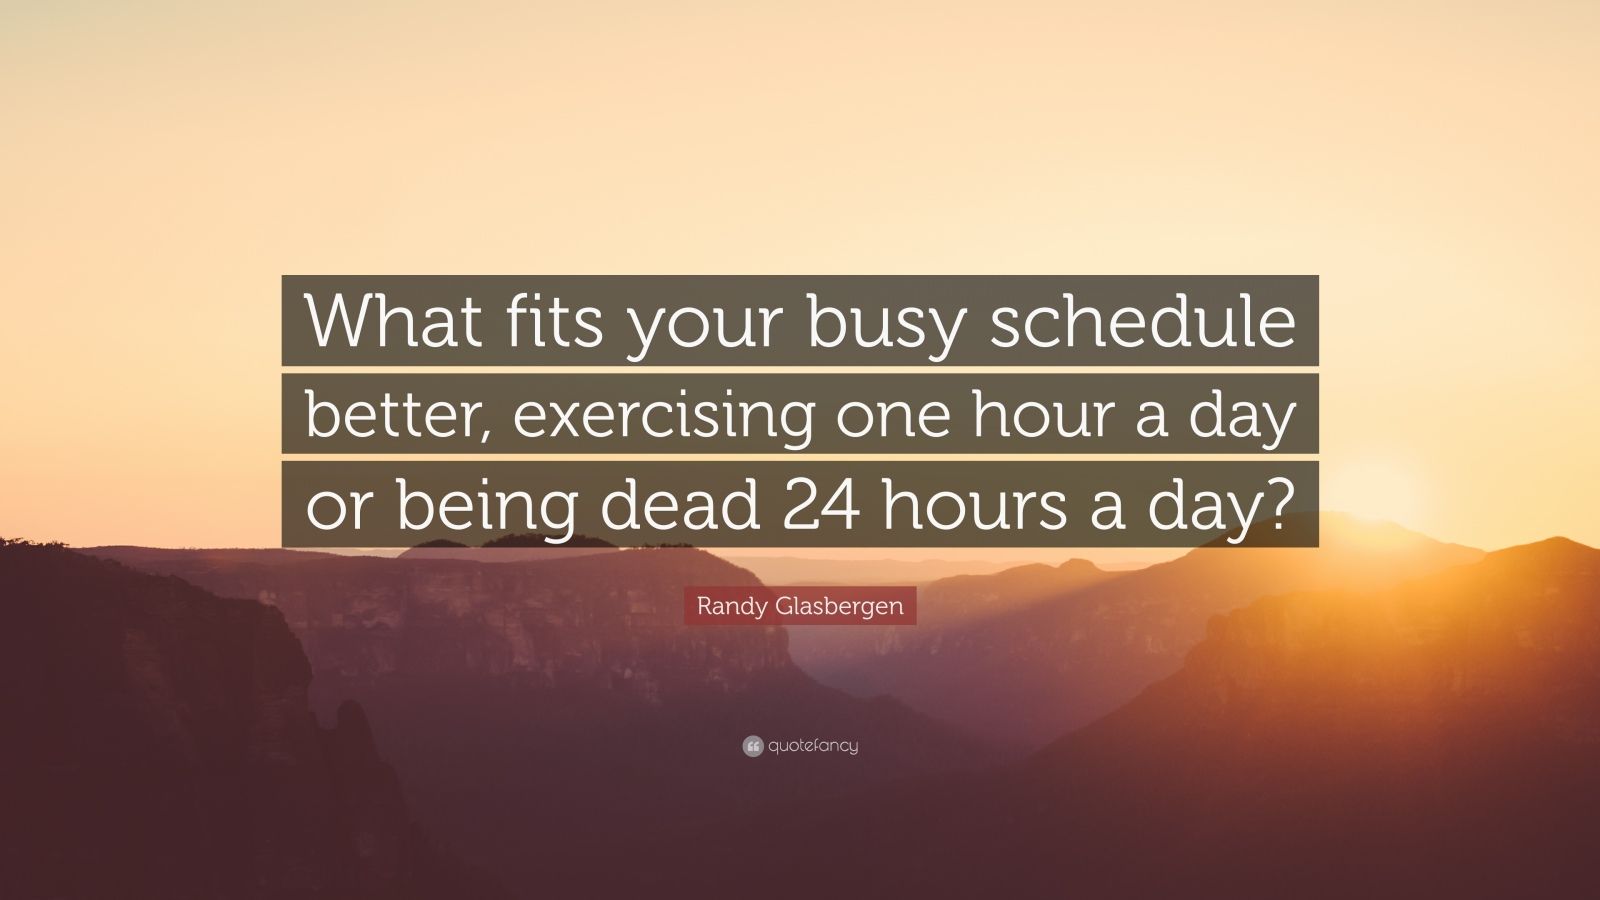 taking time out of your busy schedule quotes